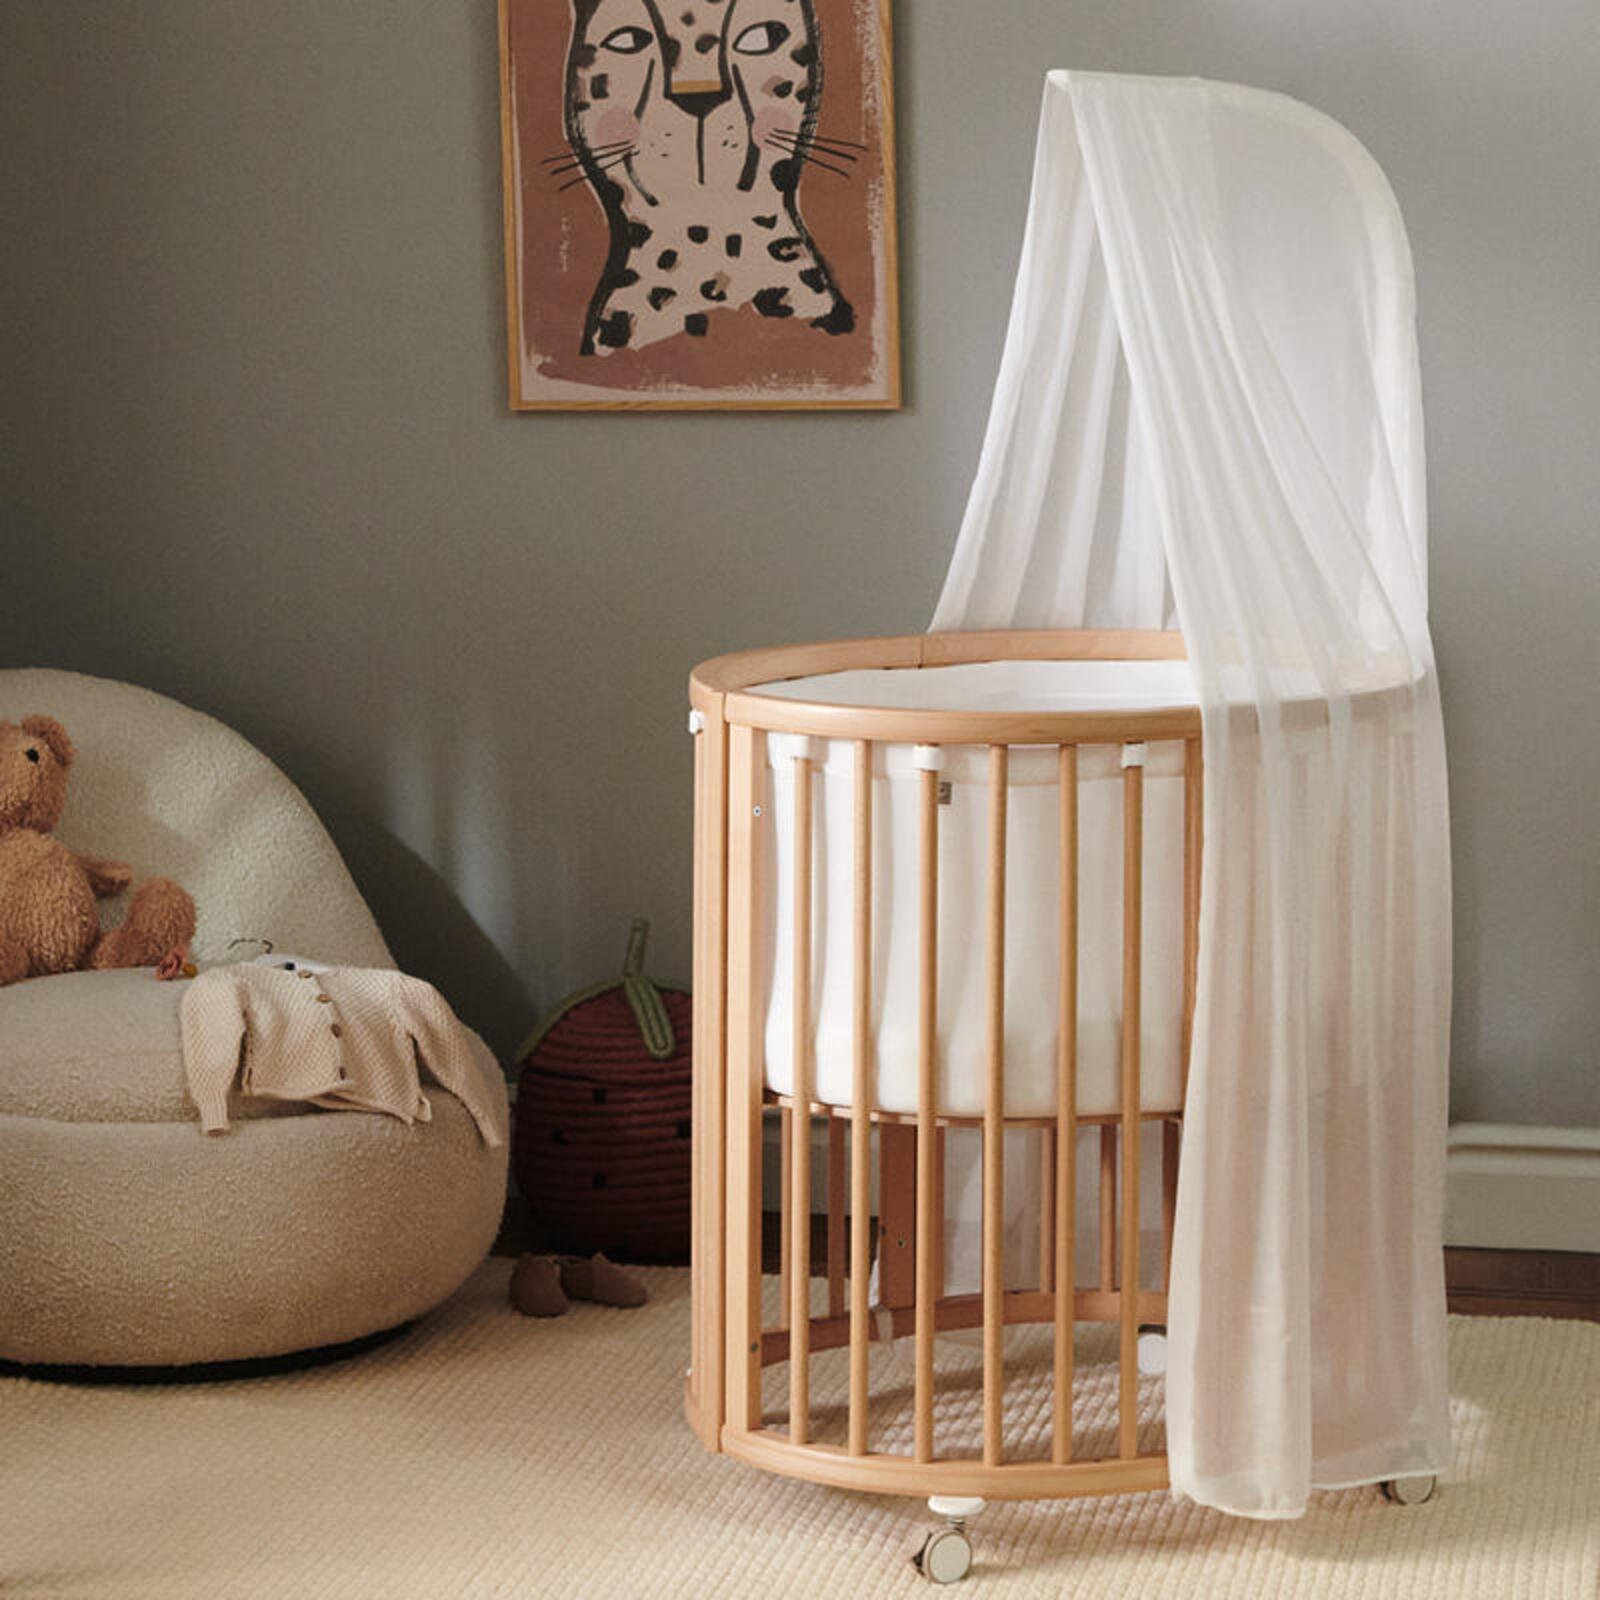 Sleepi Mini crib with canopy and liner in baby nursery.